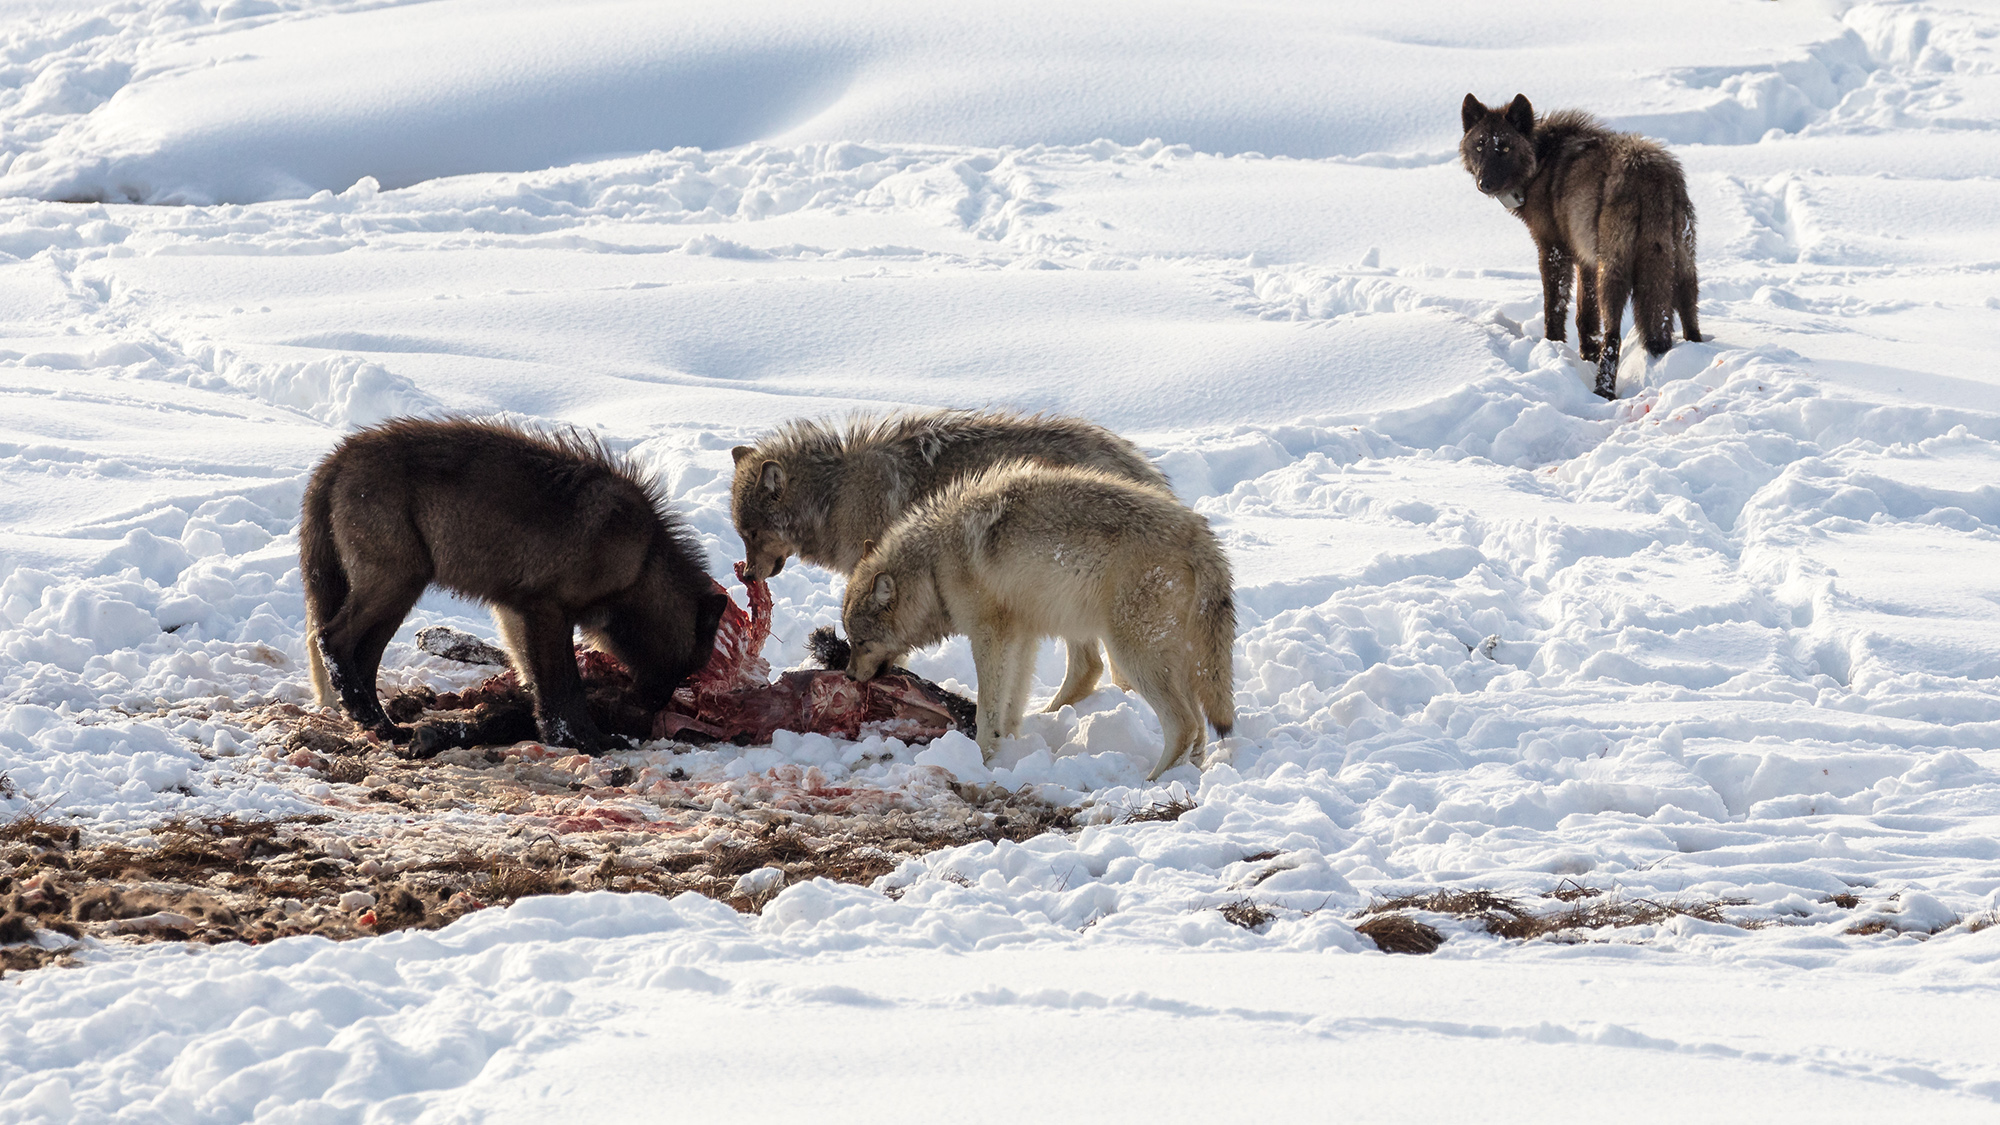 A pack of wolves eating meat in the snow.